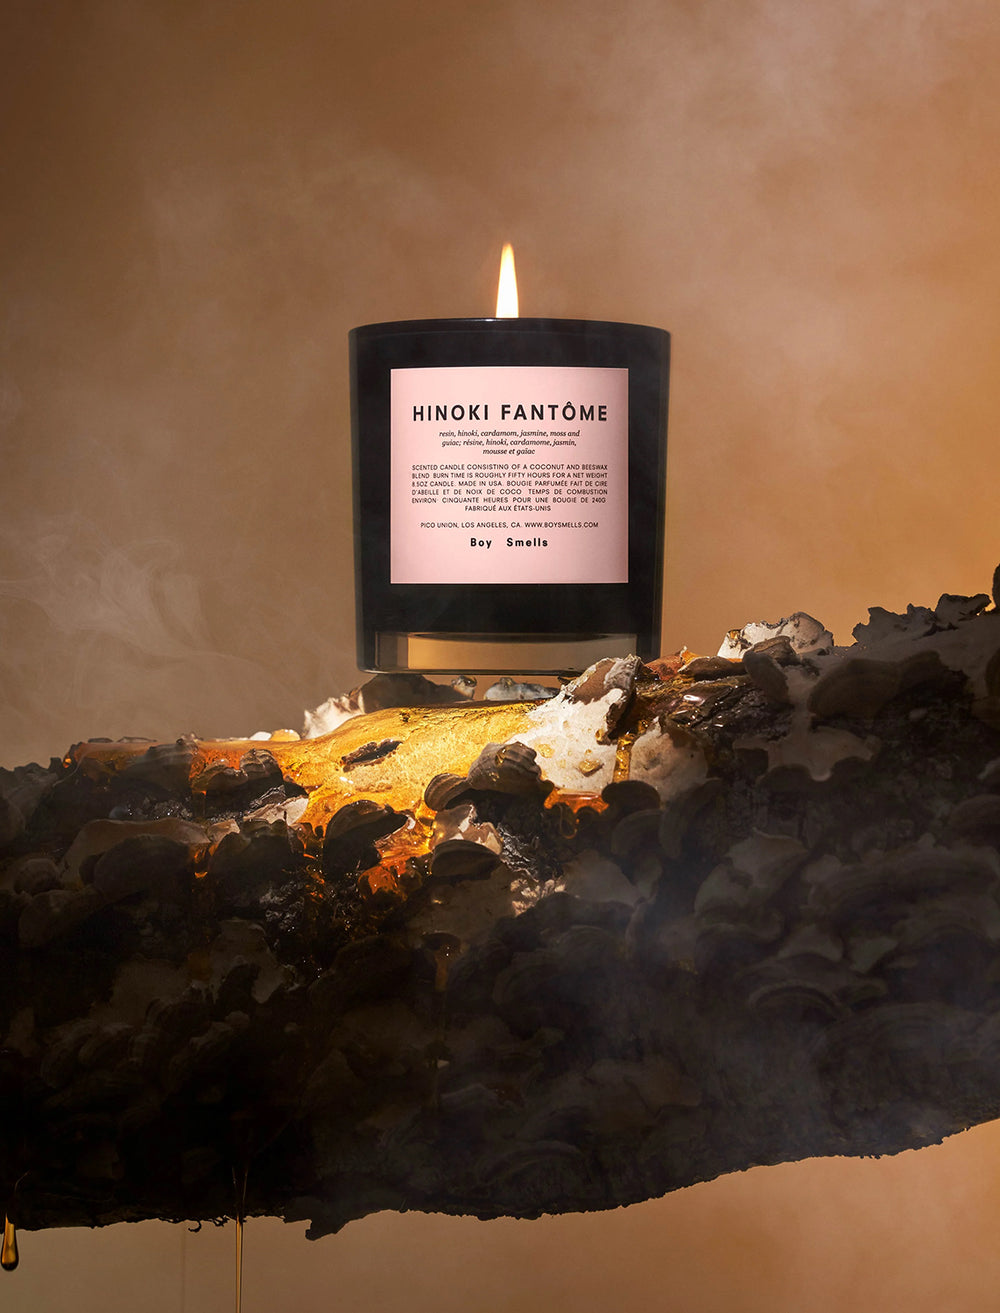 Campaign image of Boy Smells' hinoki fantome candle.